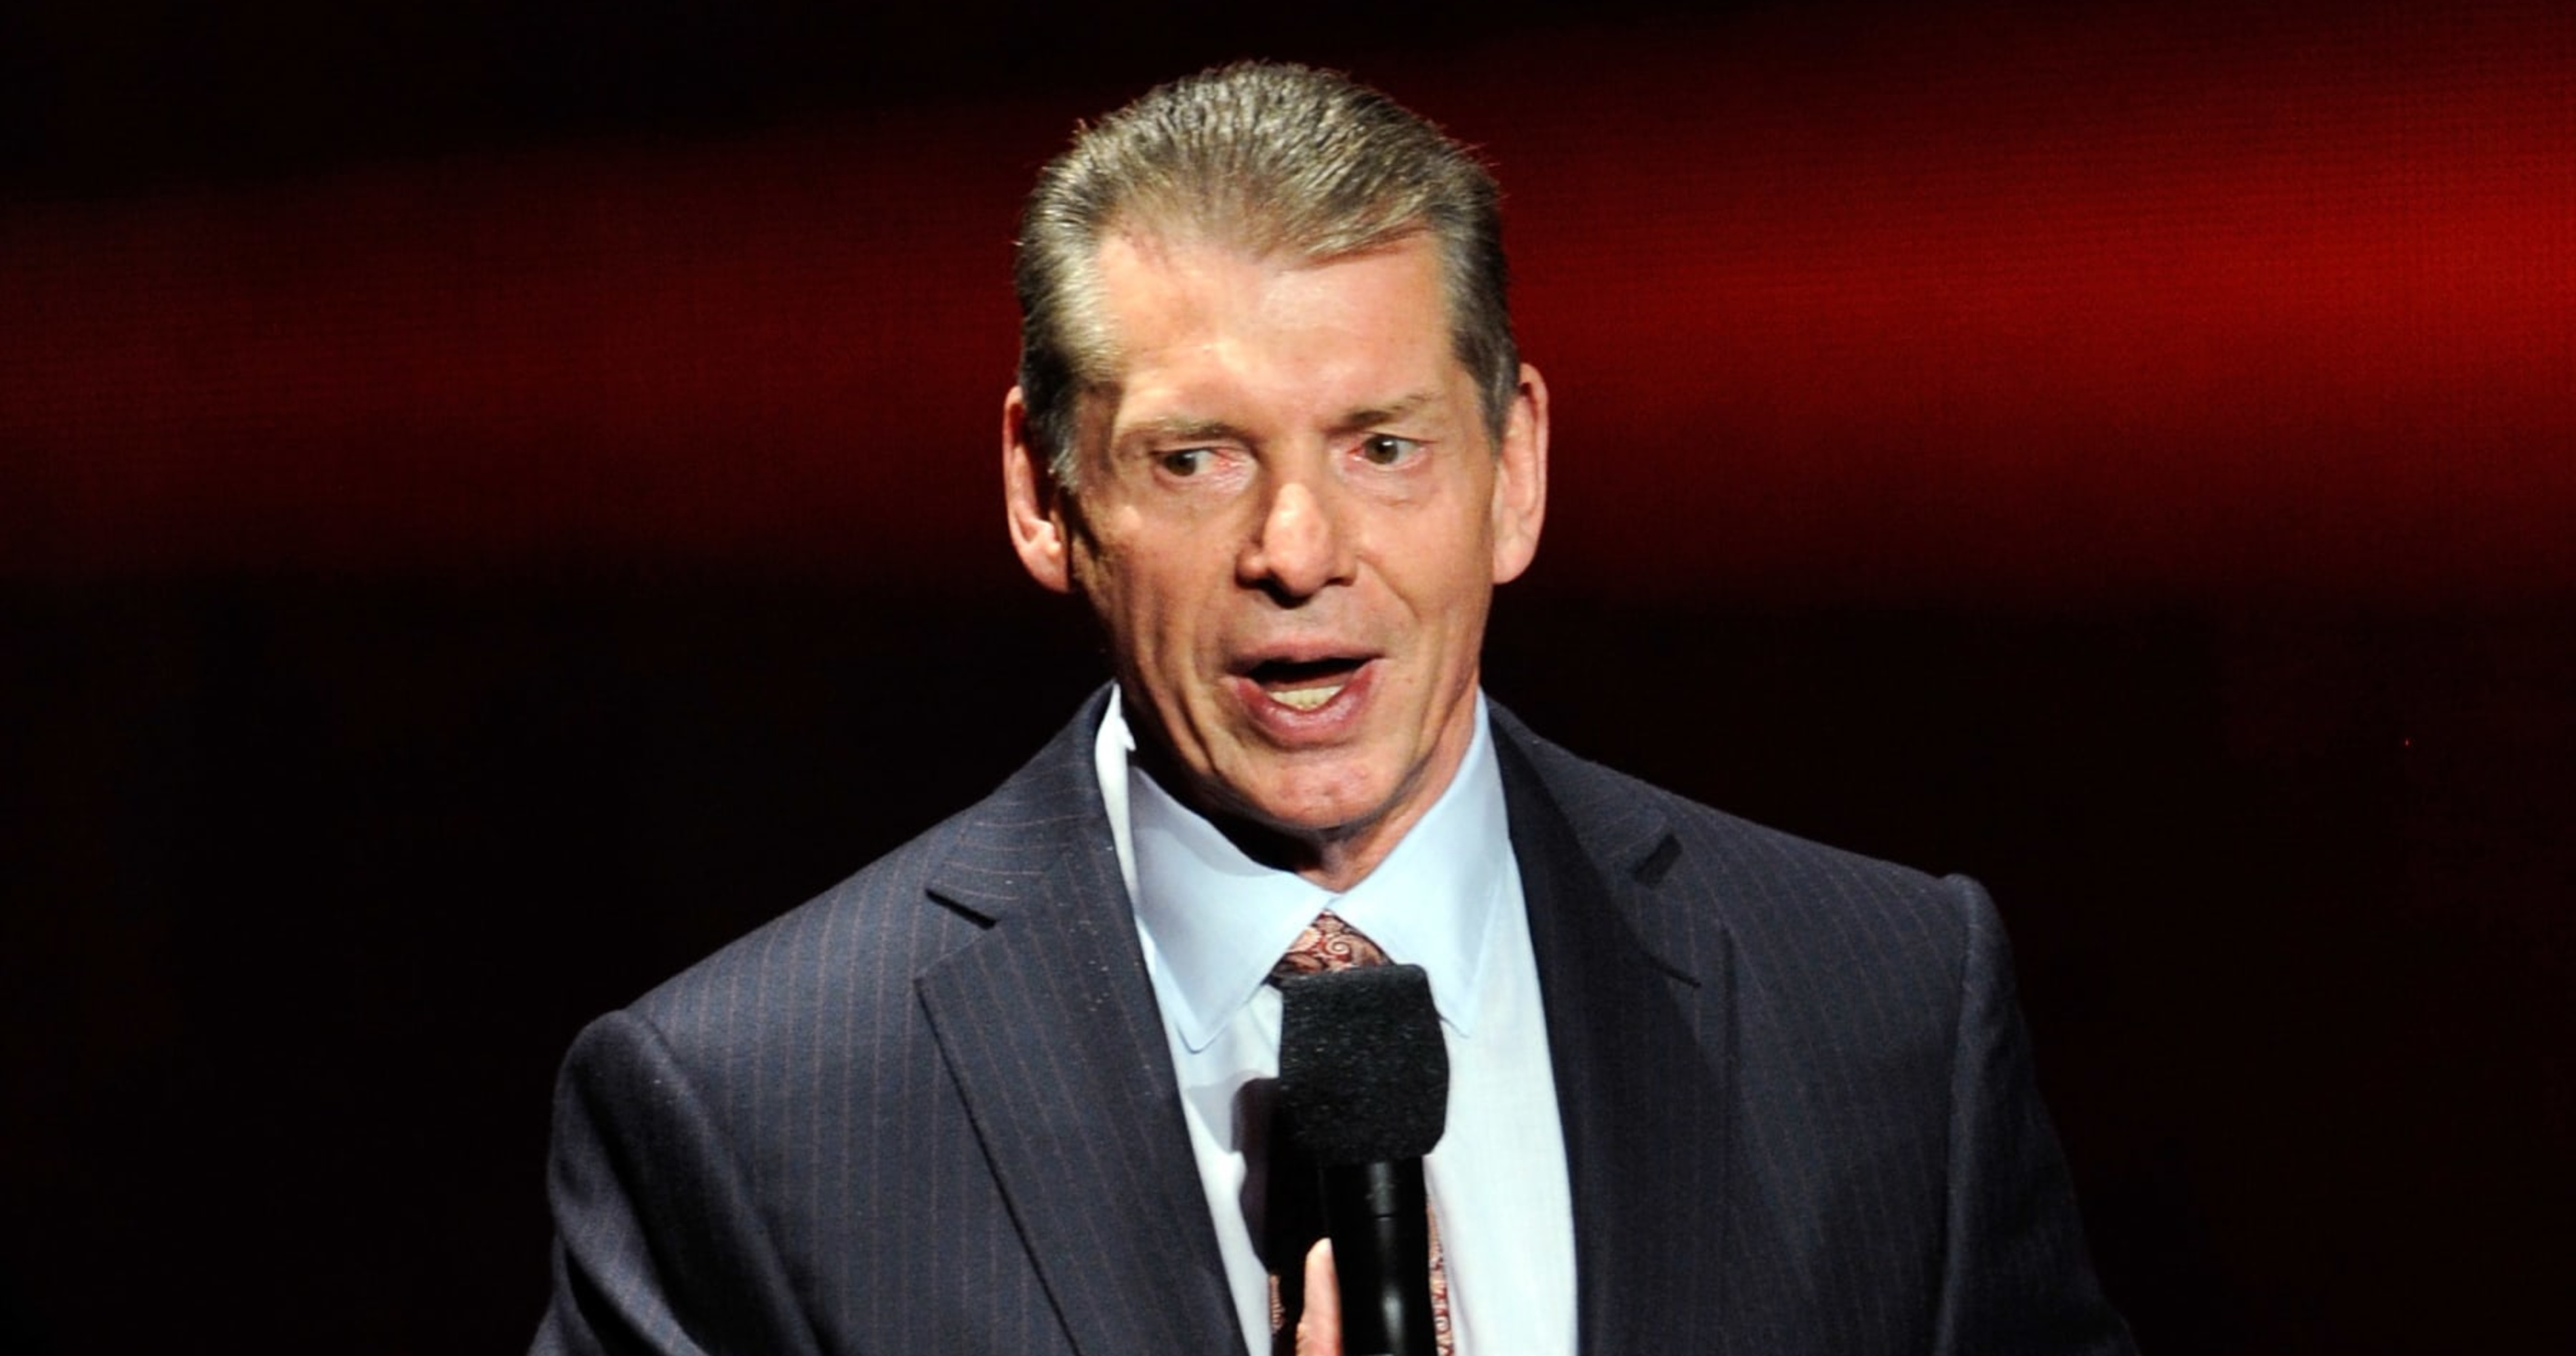 Vince Mcmahon Wwe Sued By Former Writer Alleges Retaliation Over Racist Scripts News